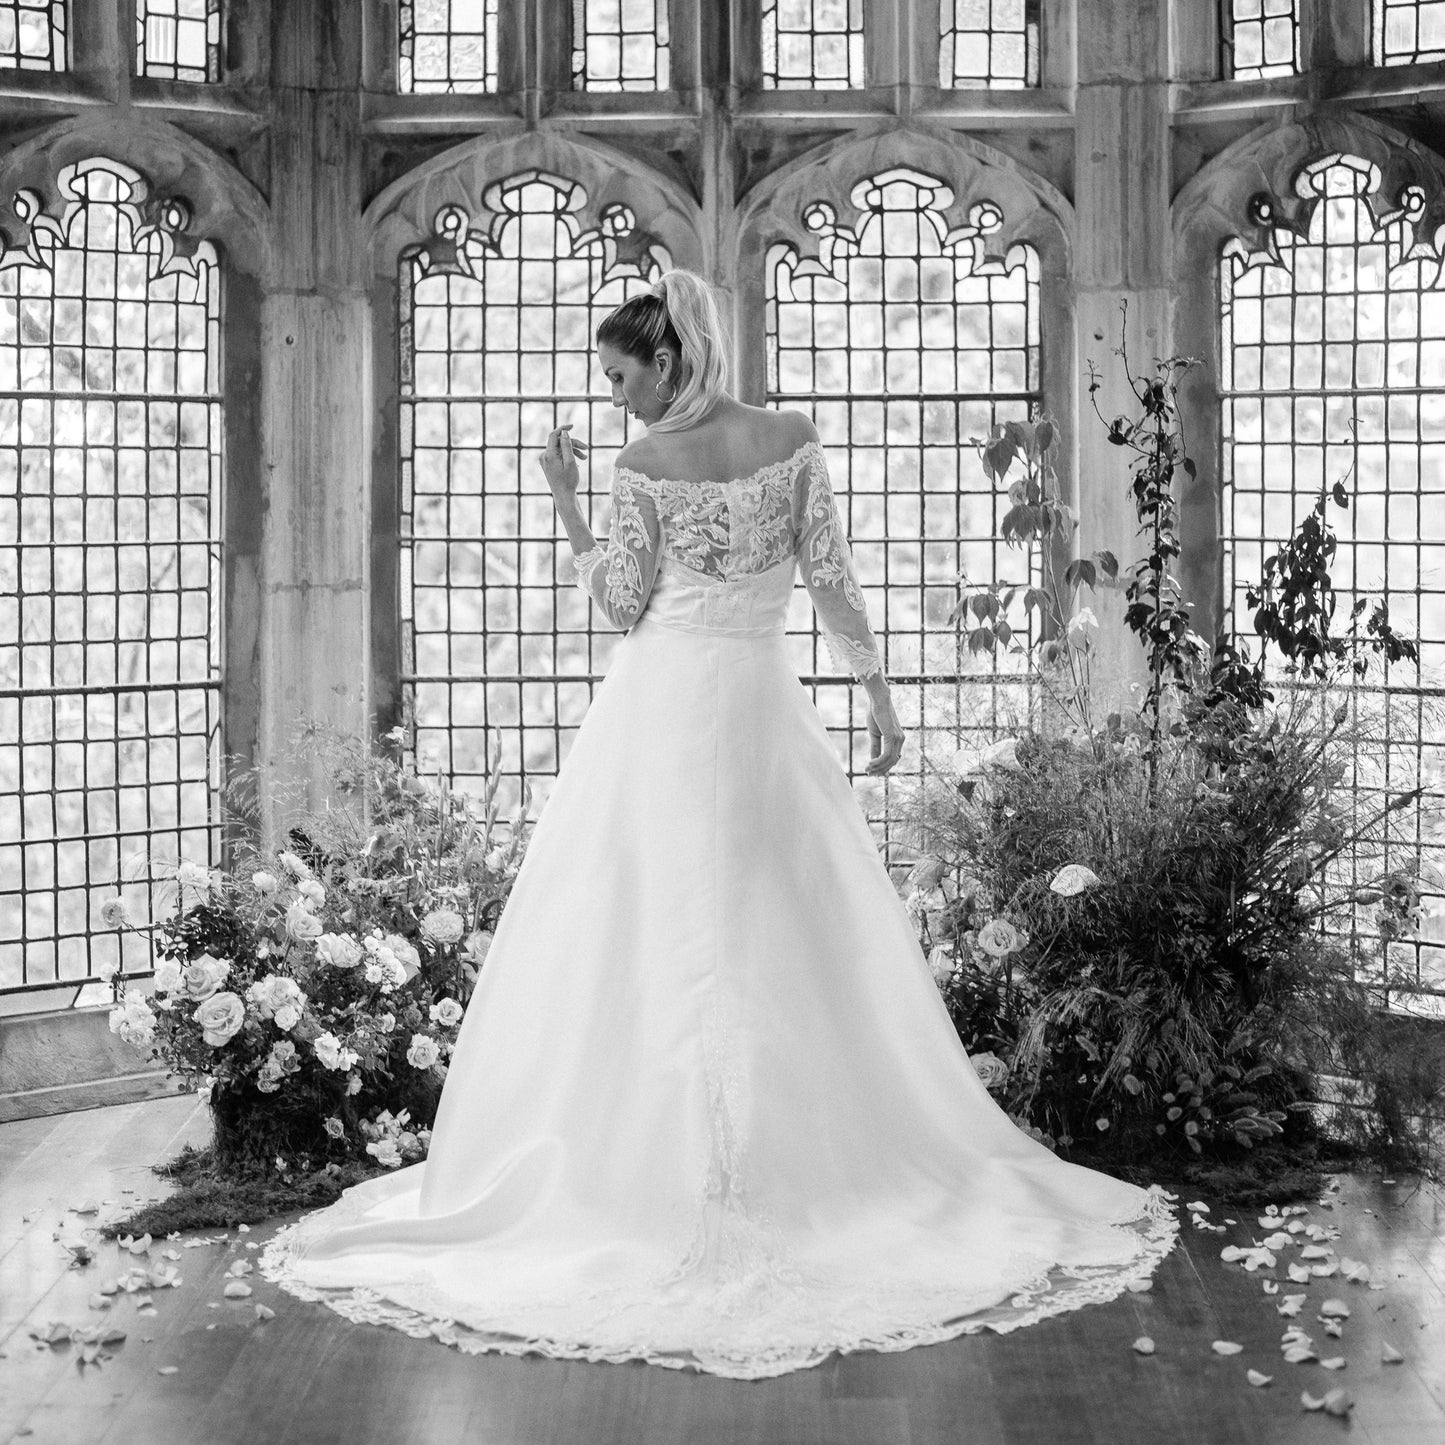 Summer wedding dress with a lace-adorned sweetheart neckline, detachable sleeves, and a flowing train.